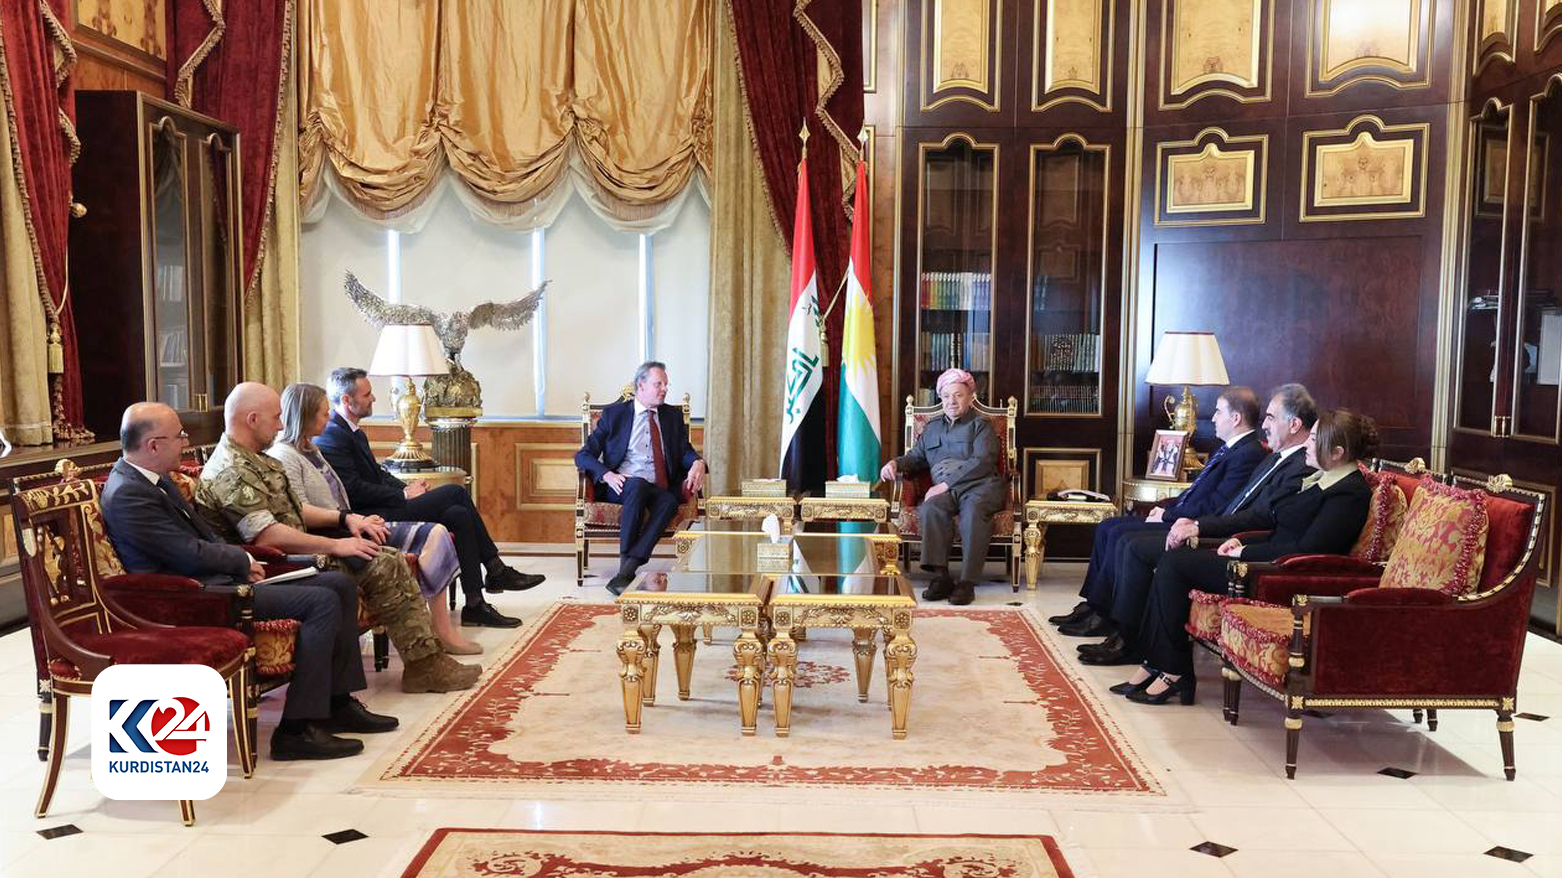 A photo of the meeting between KDP President and both Consul Generals of Germany & Netherlands. (Photo: Kurdistan 24)